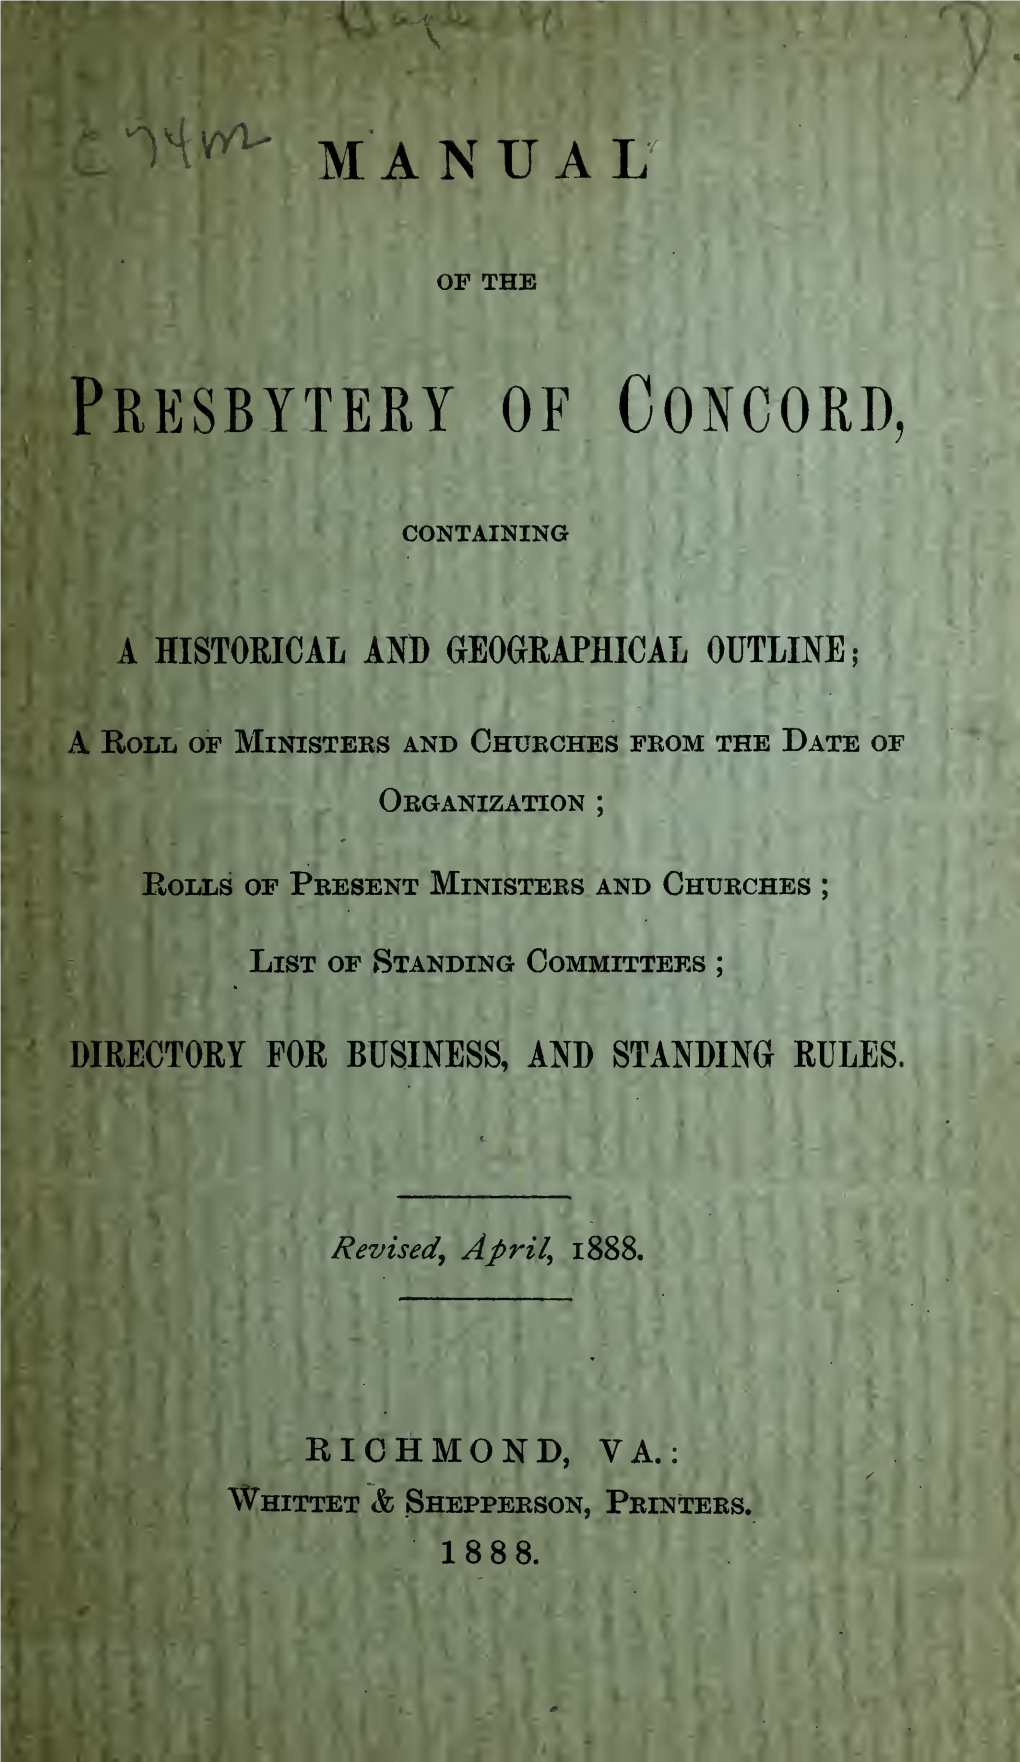 Manual of the Presbytery of Concord